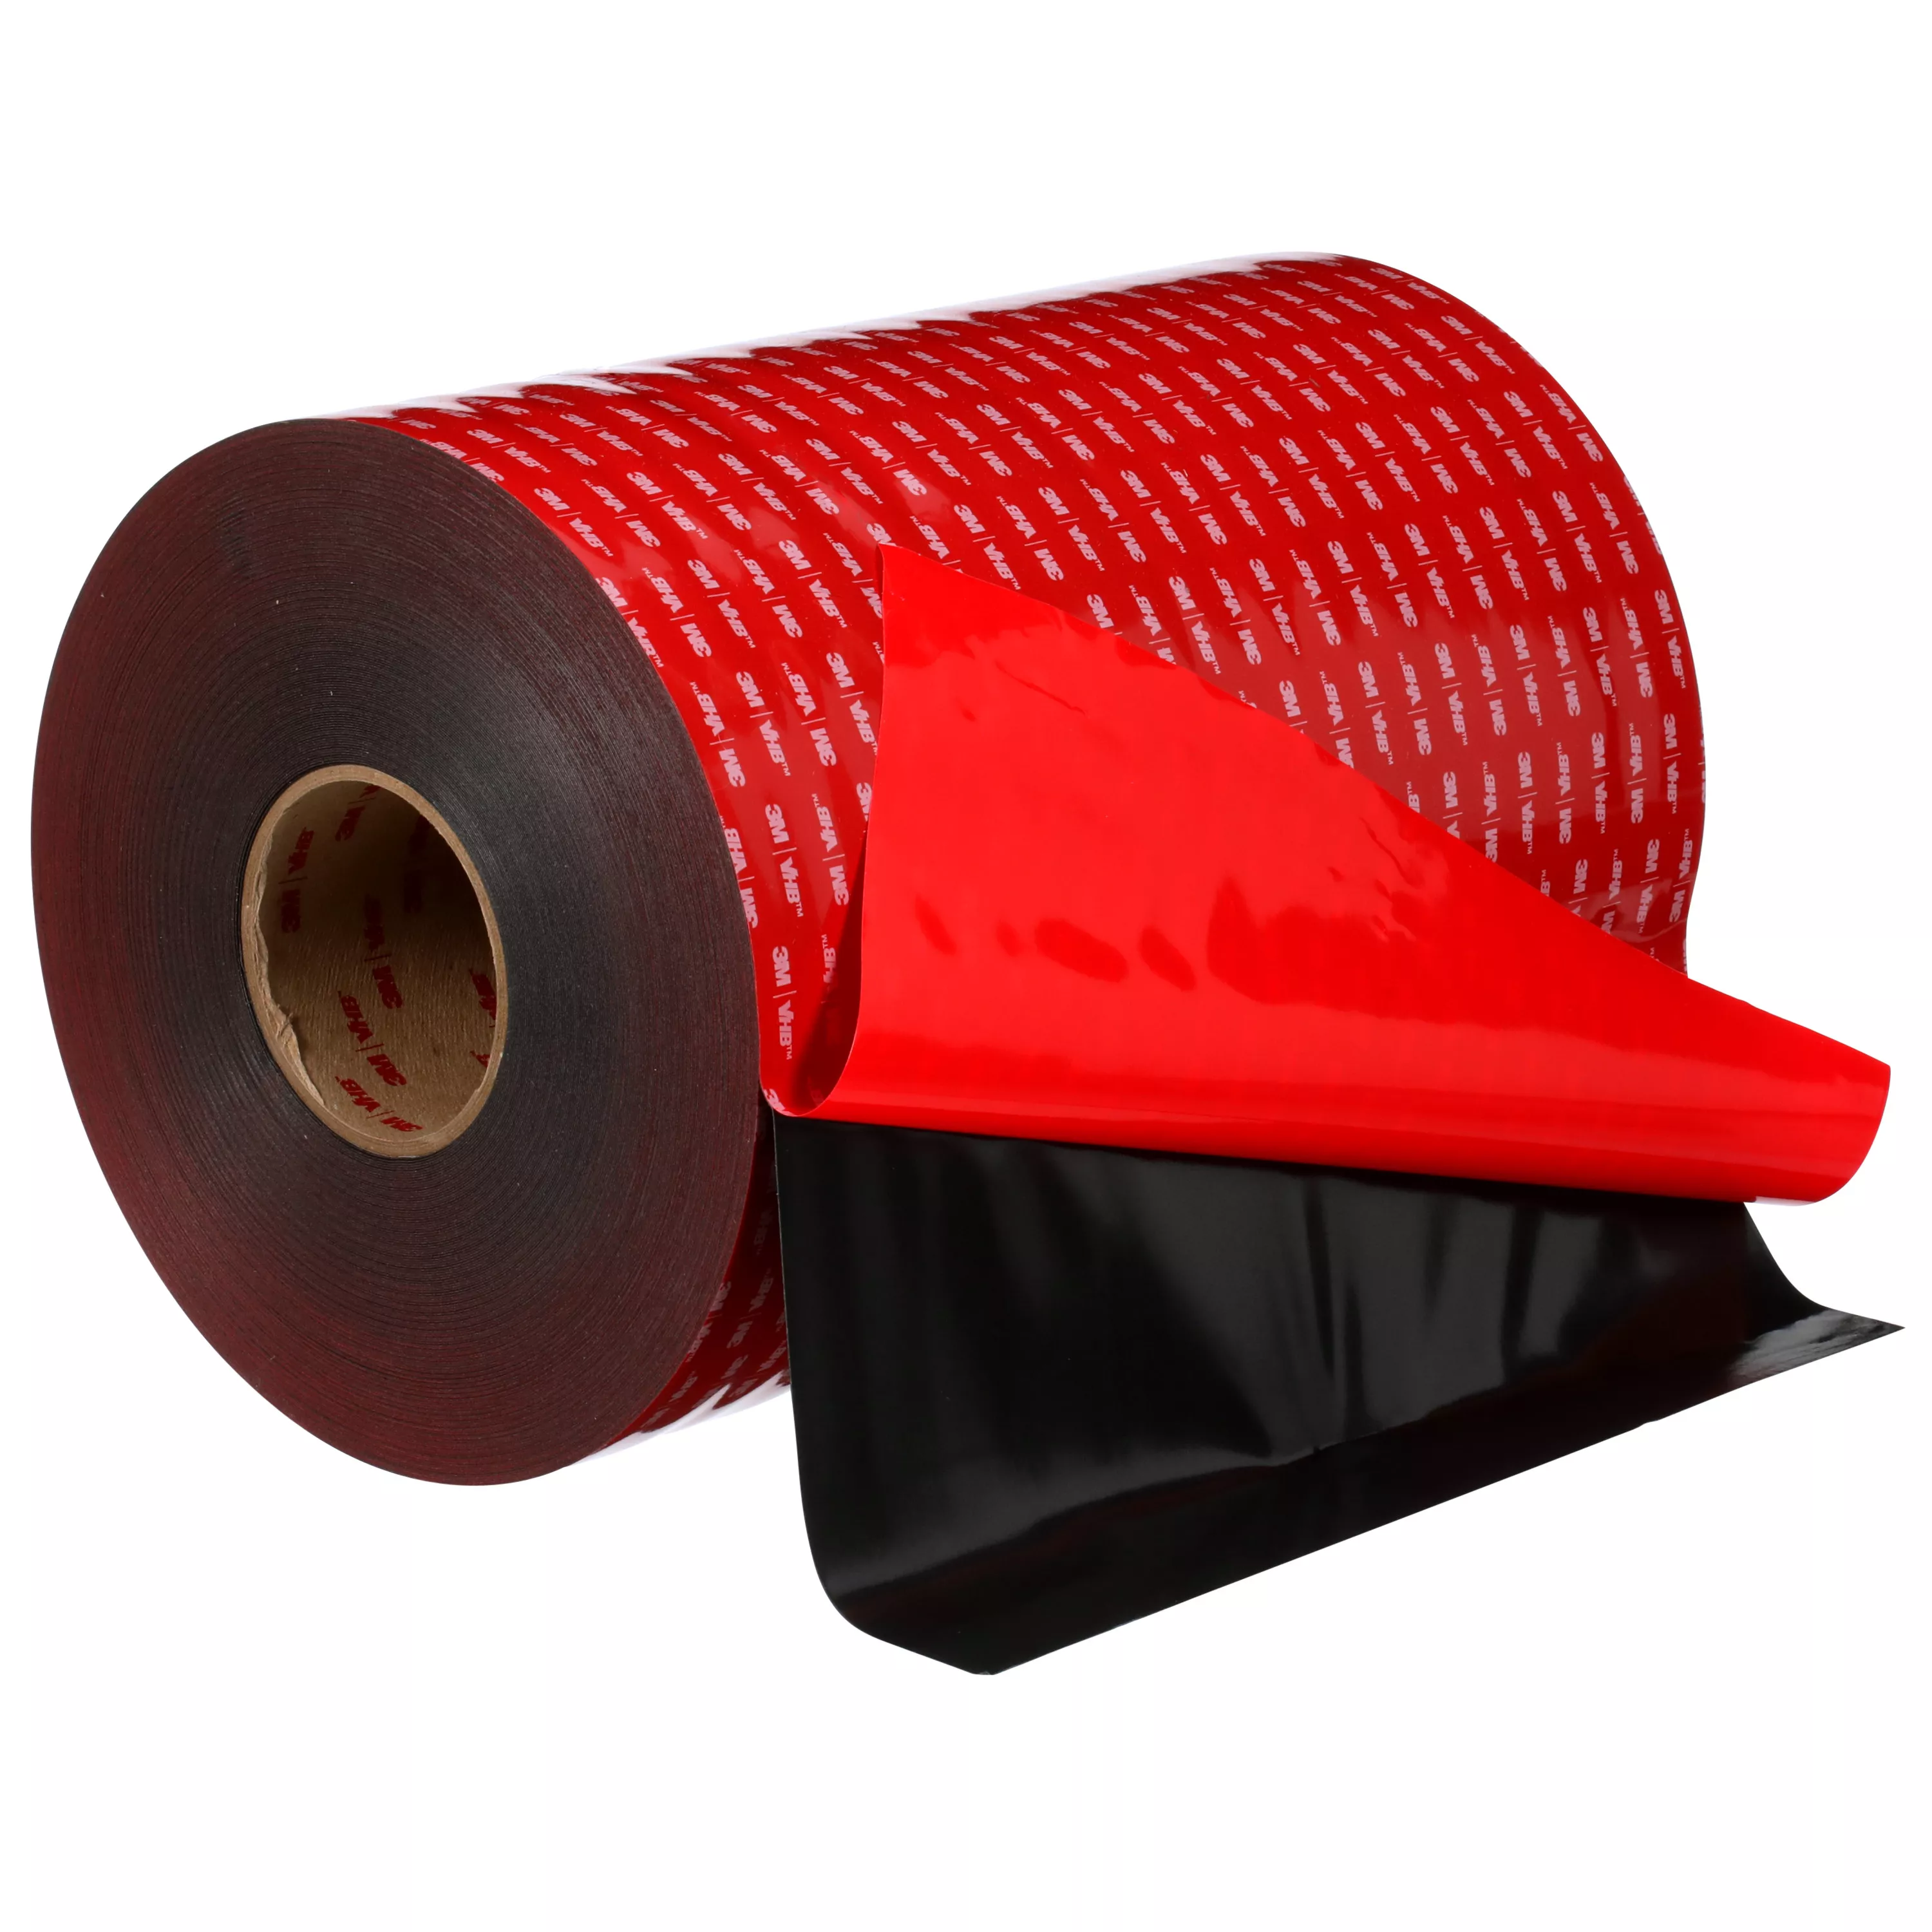 Product Number 5925 | 3M™ VHB™ Tape 5925